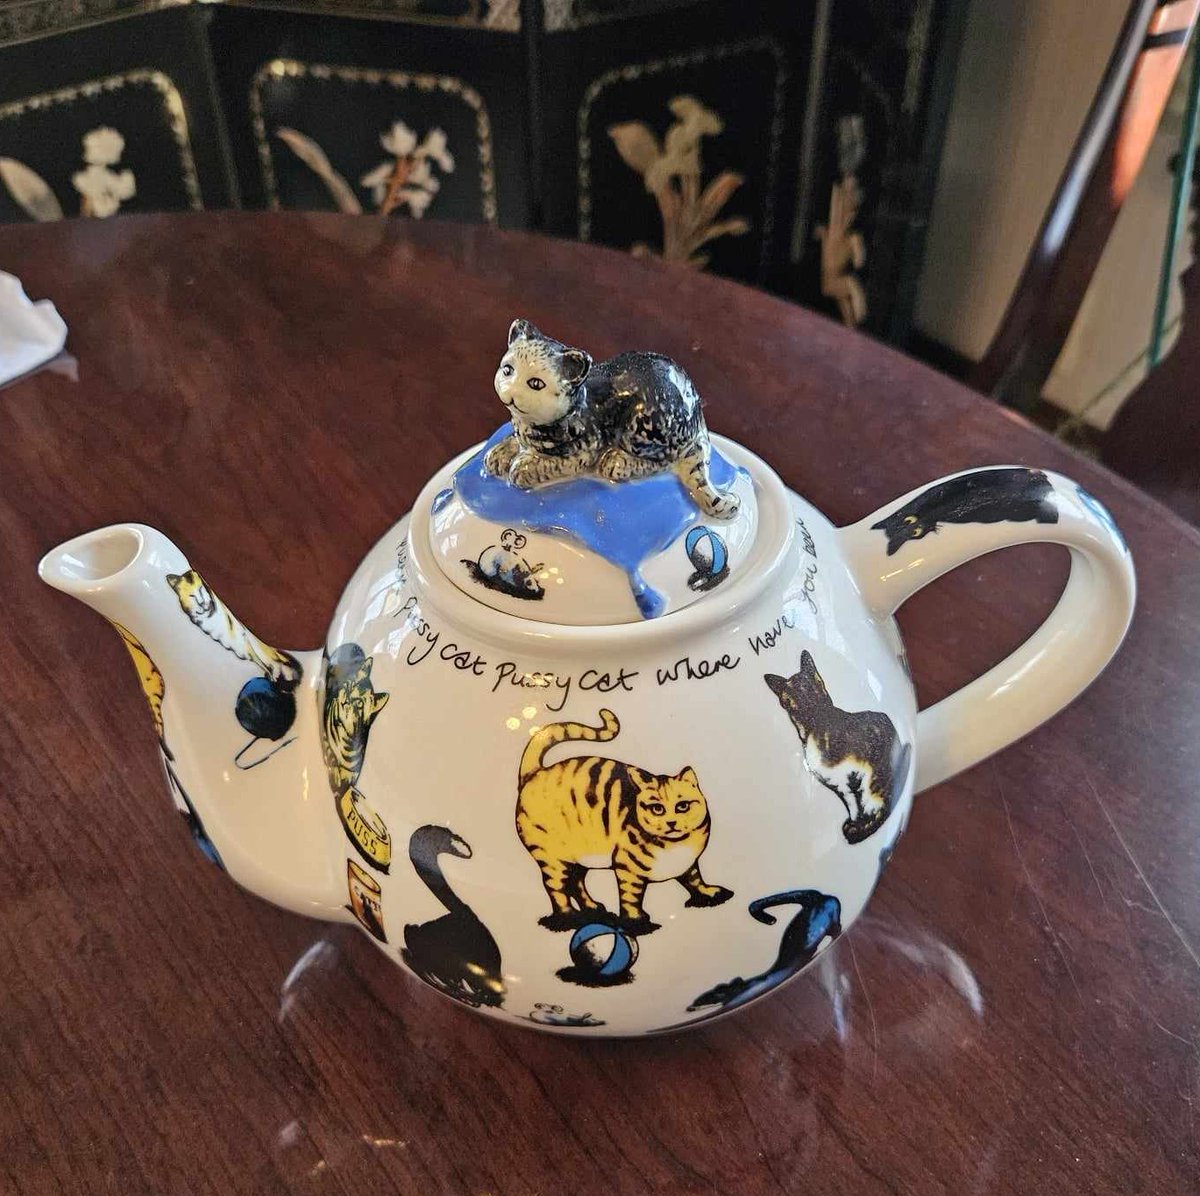 🫖 Teapot Tuesdays! What better way to celebrate National Pet Day than with a cuppa from this kitty pot? 😻
#teapottuesdays #authorswhodrinktea #nationalpetday #catteapot #timetravelinglibrarian #berylbluetimecopseries